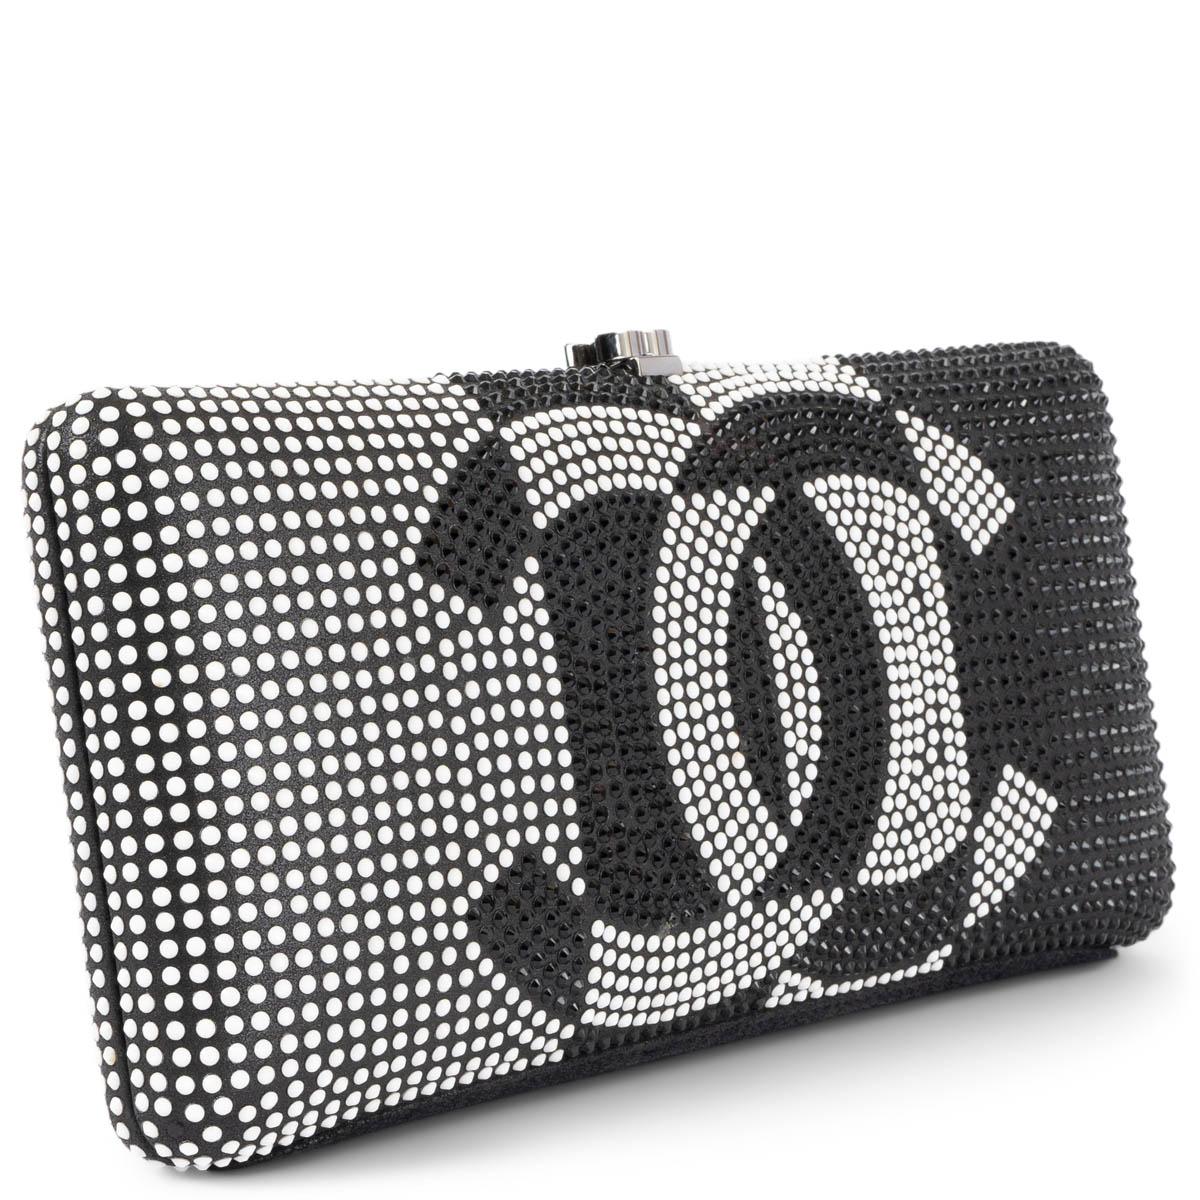 100% authentic Chanel CC Minaudière black satin hard case clutch with chain embellished black & white strass and ruthenium CC logo closure and shoulder-strap. The interior is lined in black satin. Has been carried and three black and one white